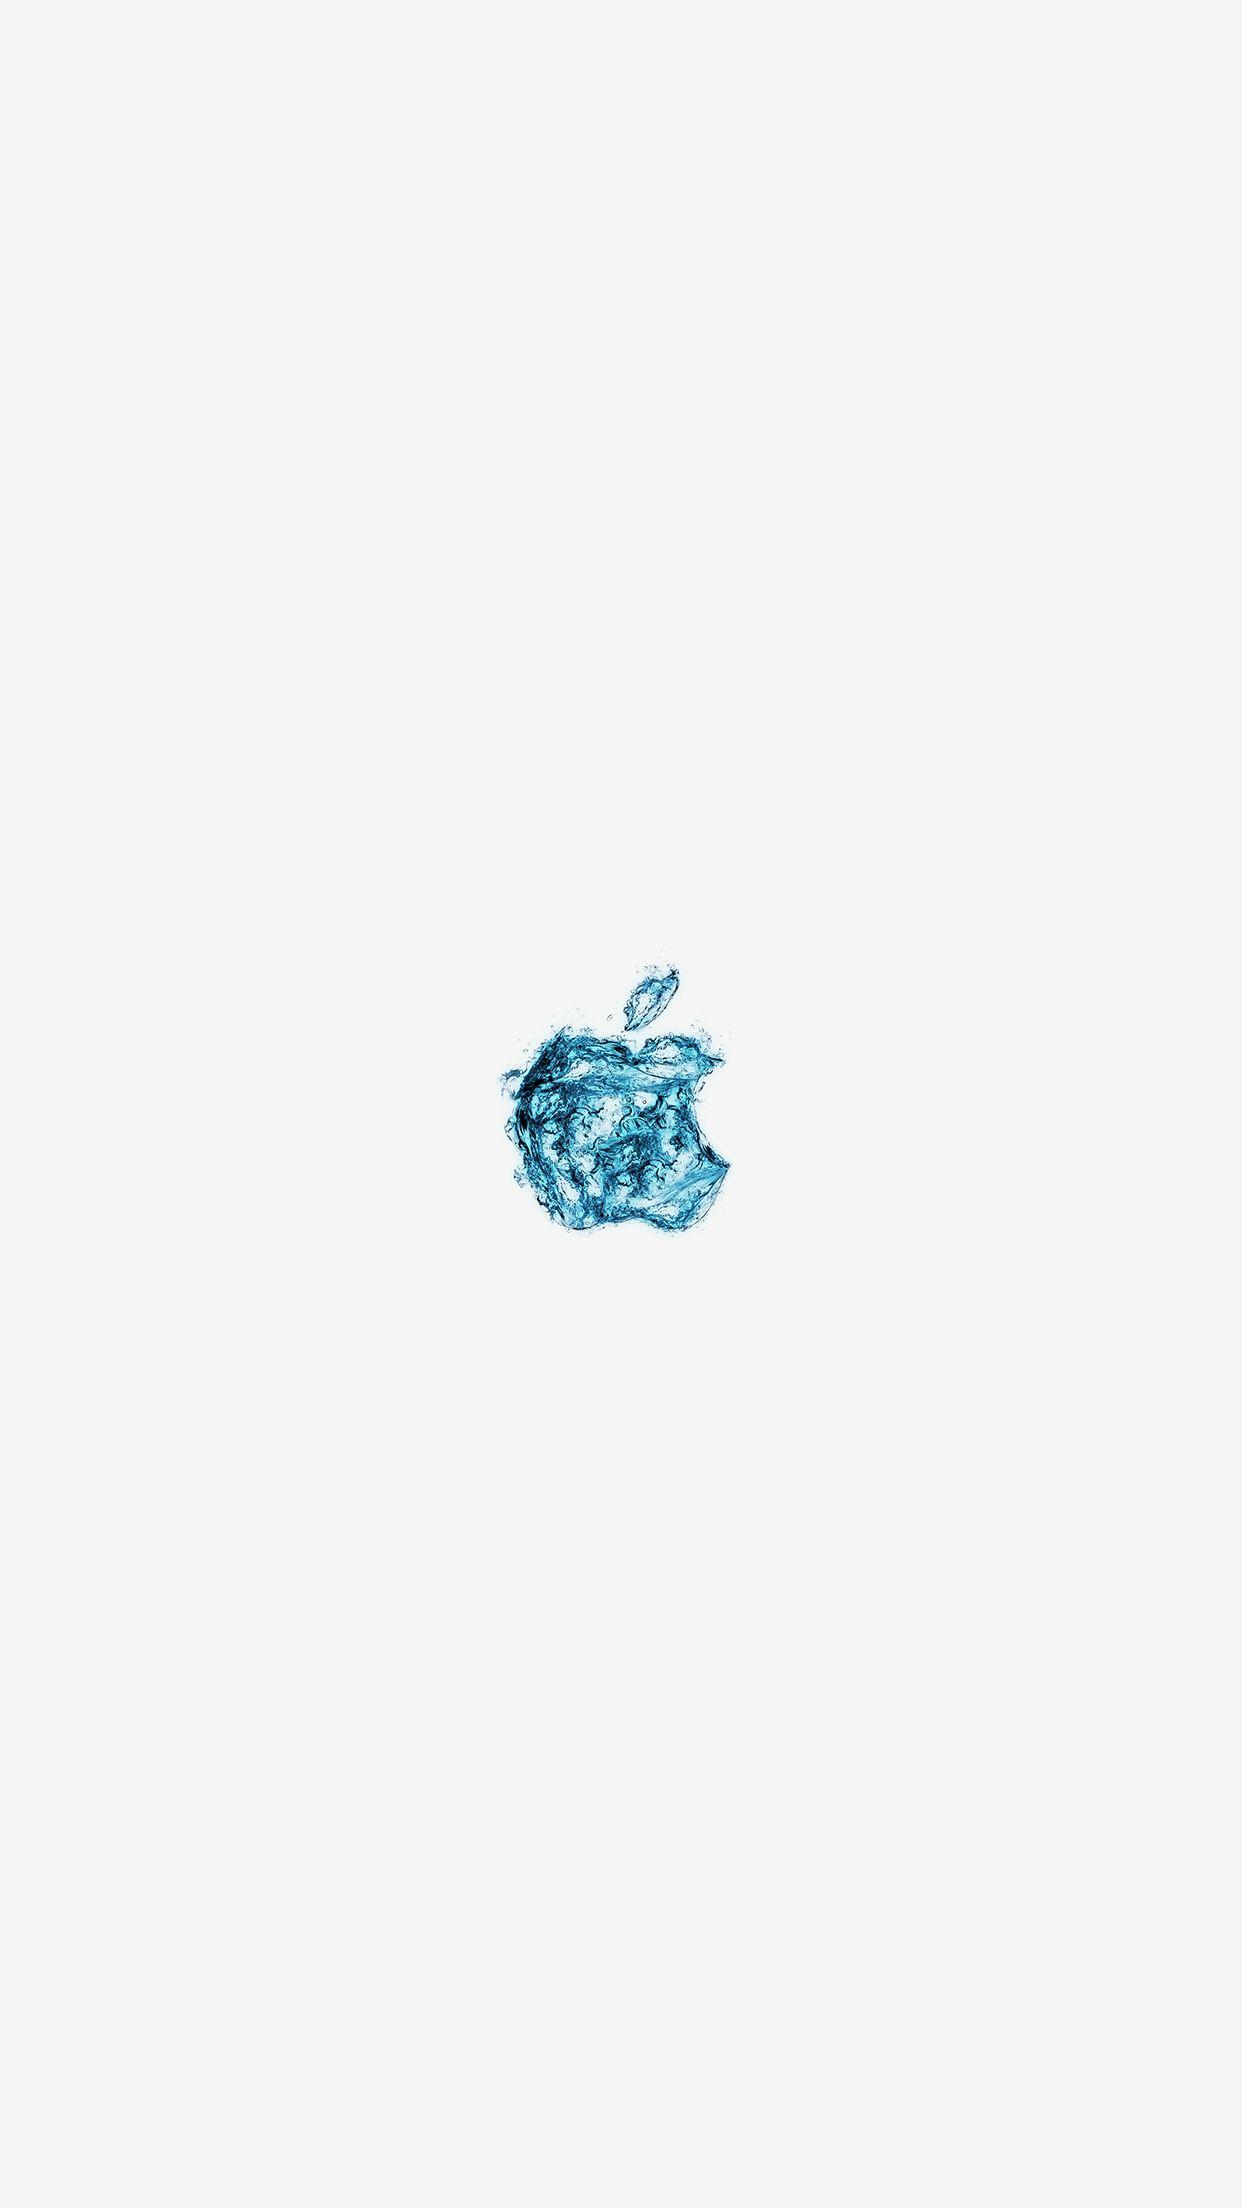 Blue Apple Logo - iPhone7papers.com | iPhone7 wallpaper | at08-apple-logo-water-white ...